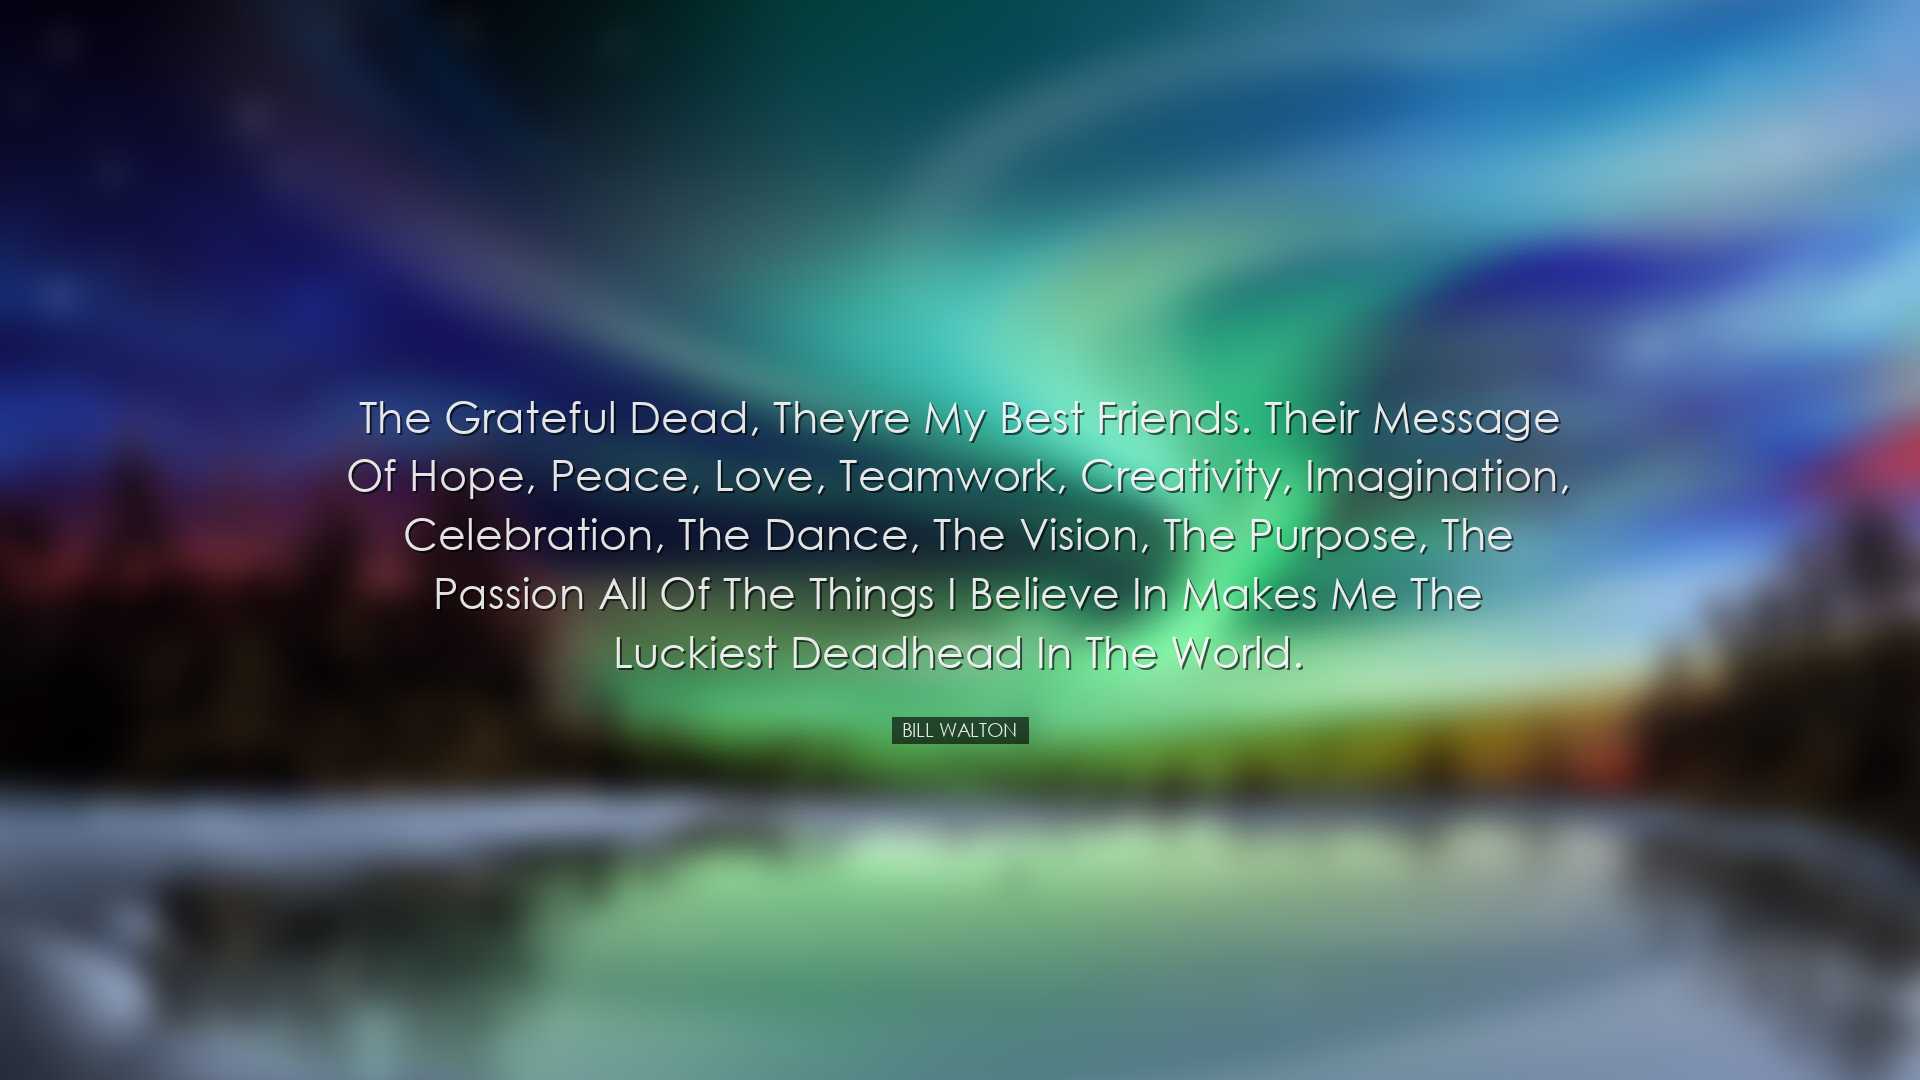 The Grateful Dead, theyre my best friends. Their message of hope,